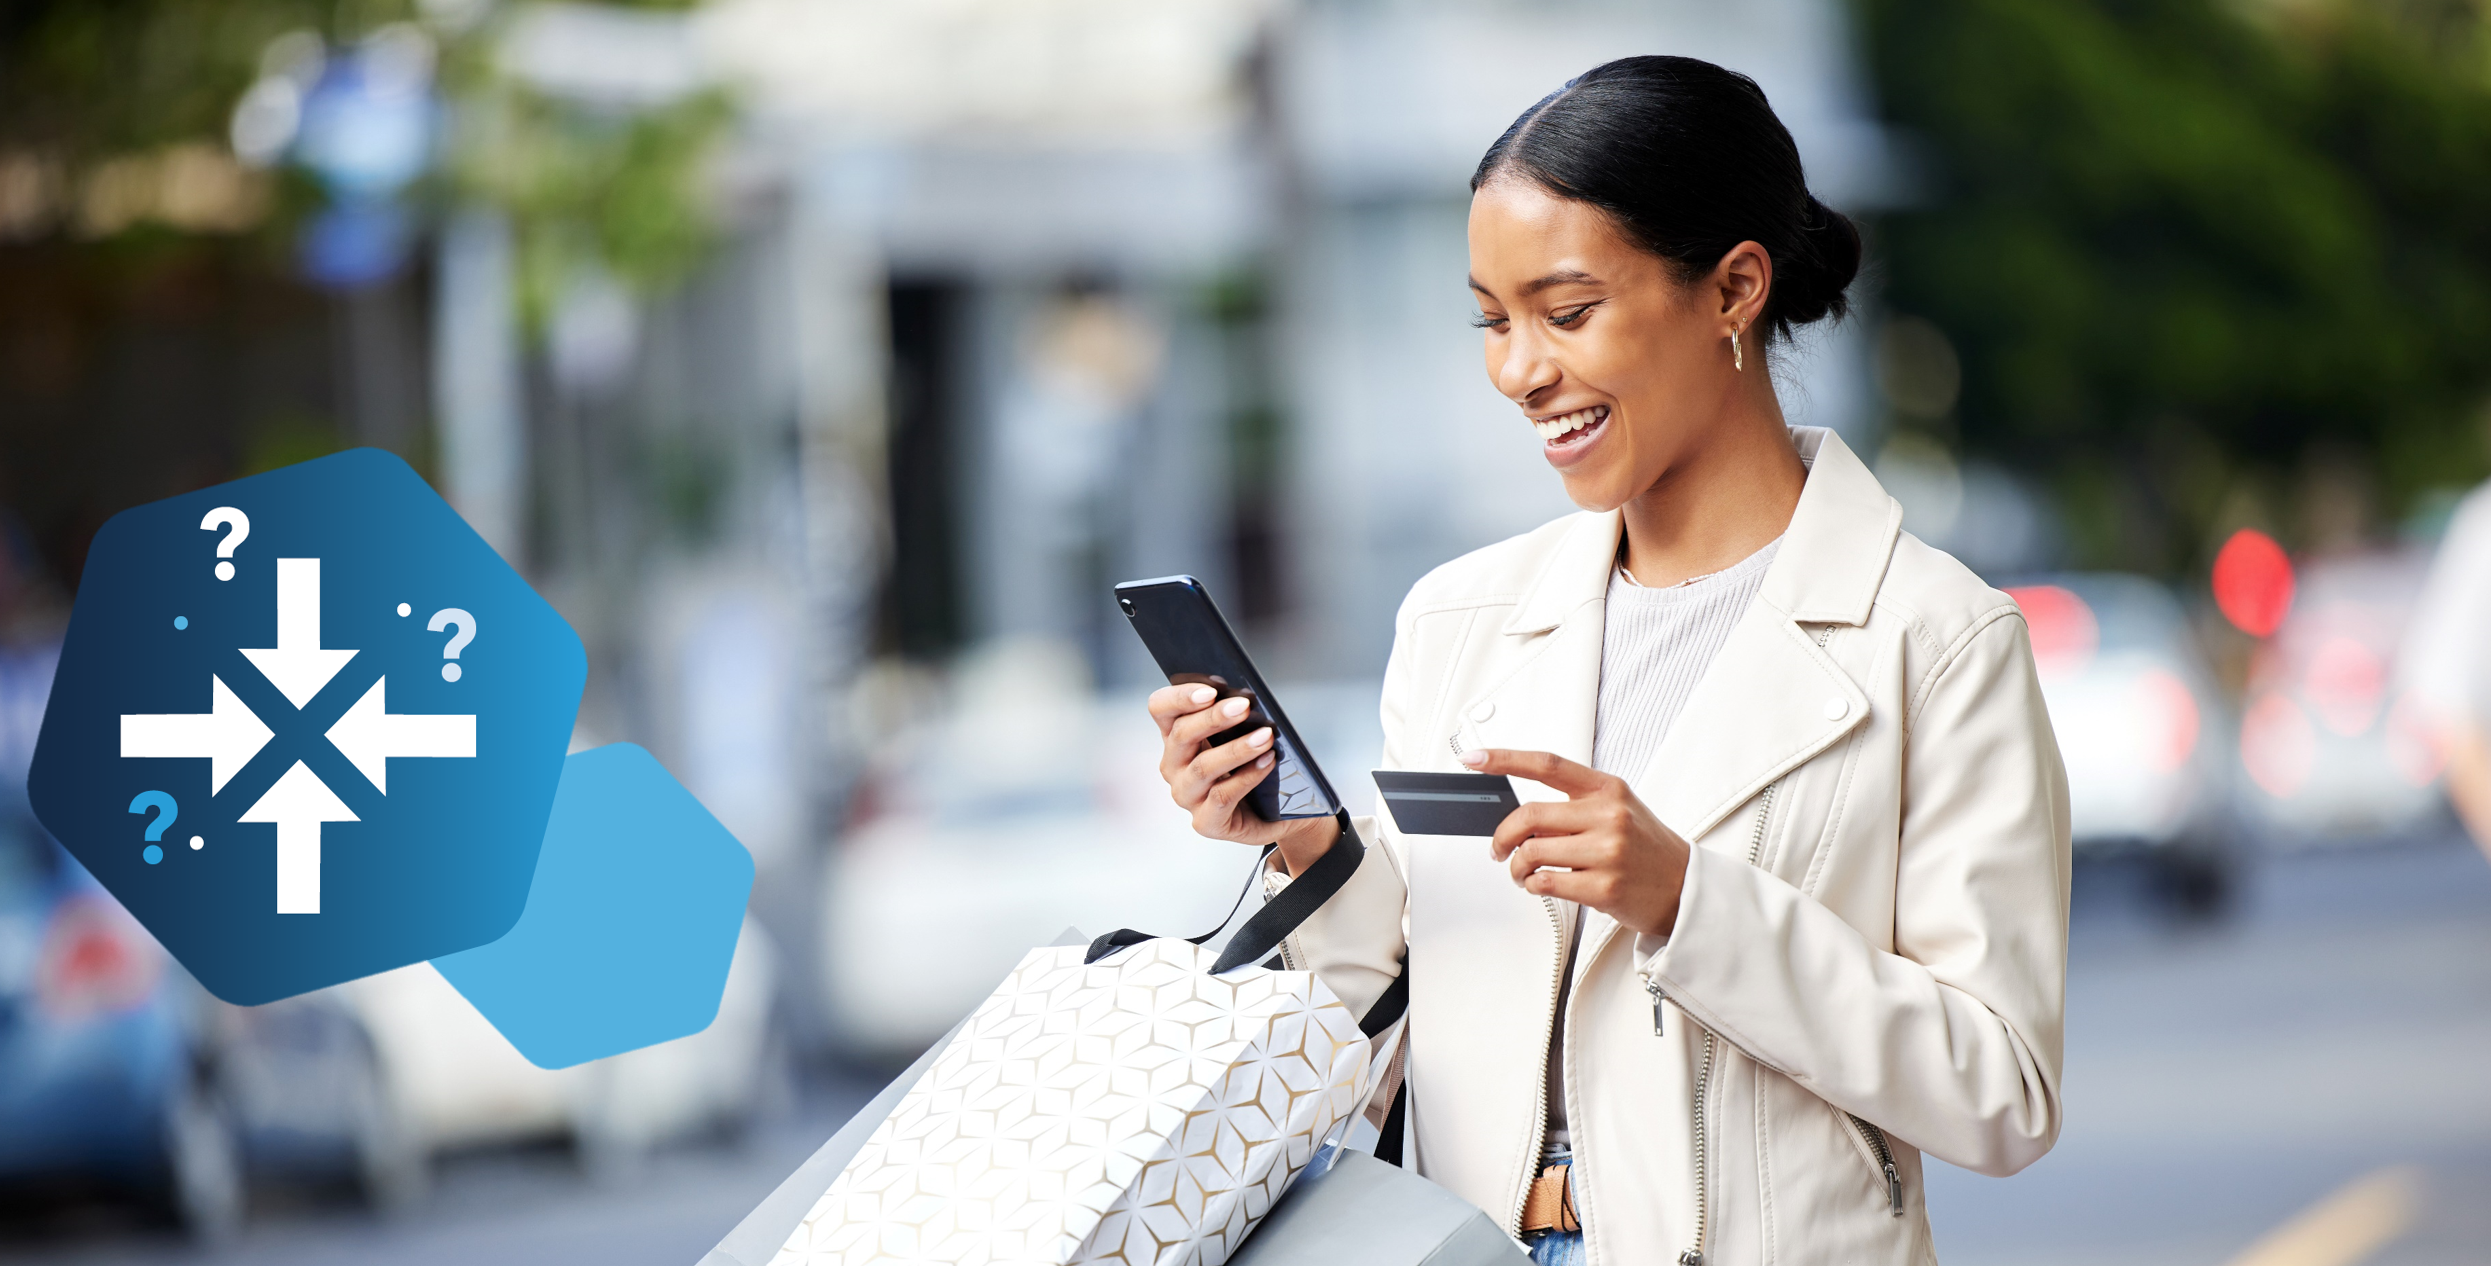 woman holding credit card and scrolling on mobile phone, carrying shopping bags